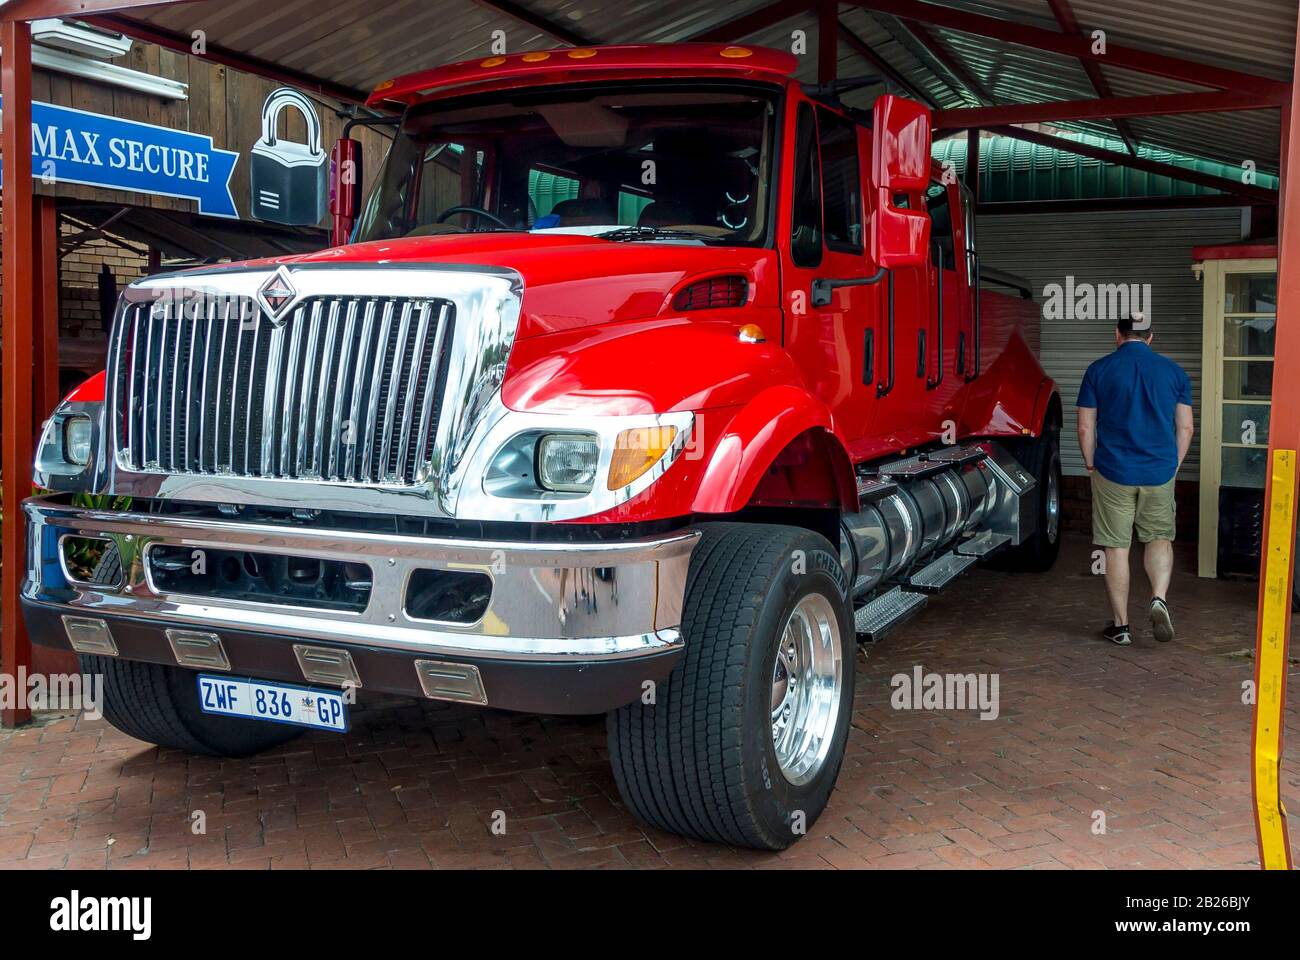 Pretoria, South Africa - 20 feb. 2020: Big red international truck with chrome wings and rims Stock Photo